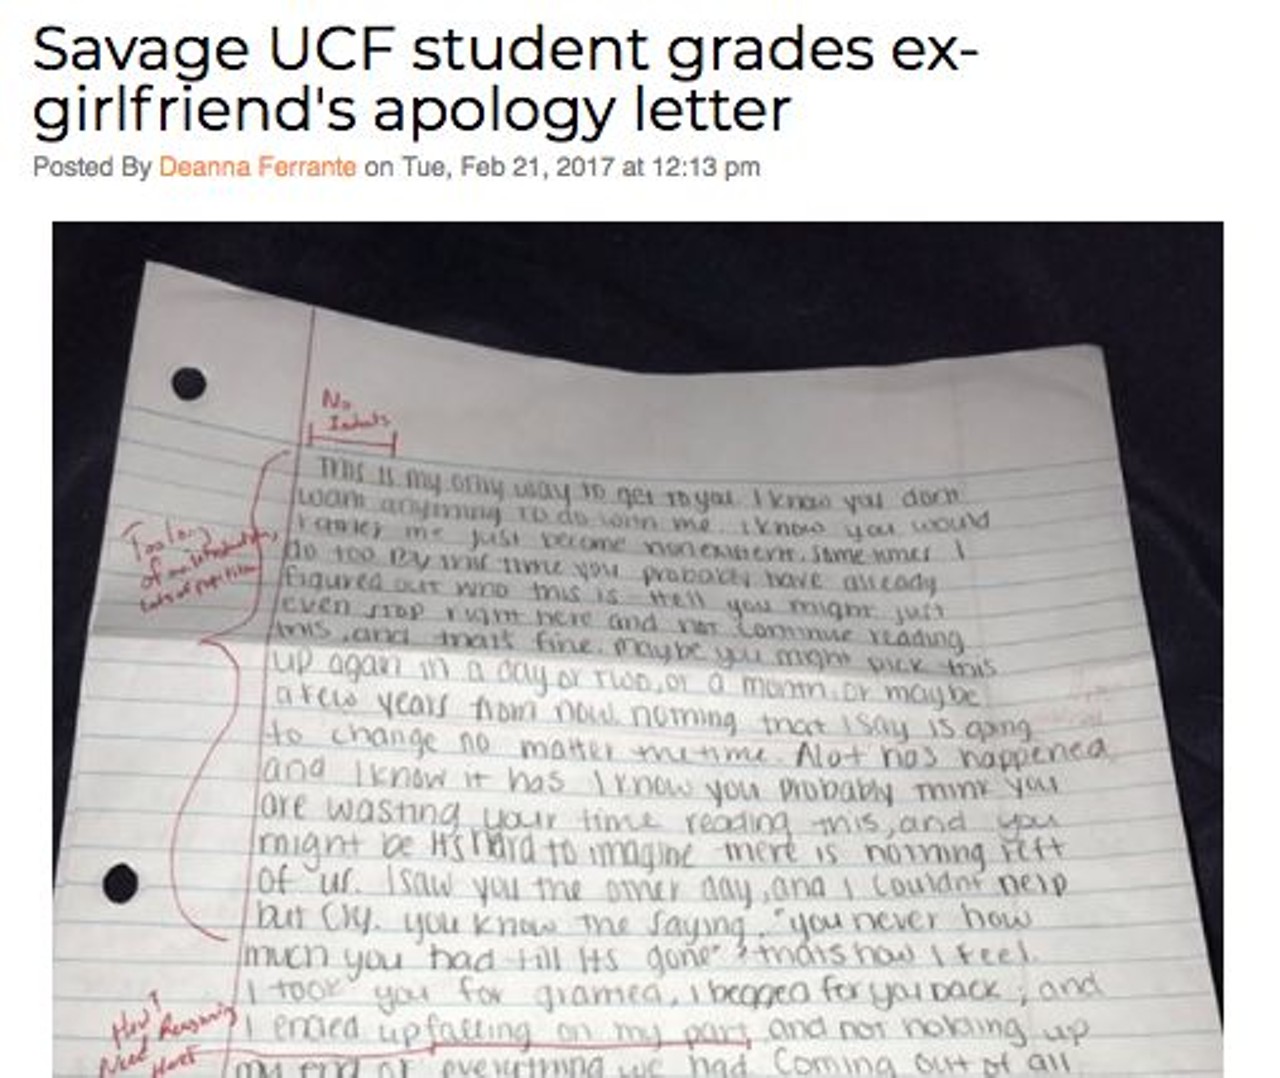 One University of Central Florida student decided to go old school, literally, to get back at his ex-girlfriend. Nick Lutz received an apology letter from his ex-girlfriend, and decided to pick up a red pen and grade her sad words. Read more